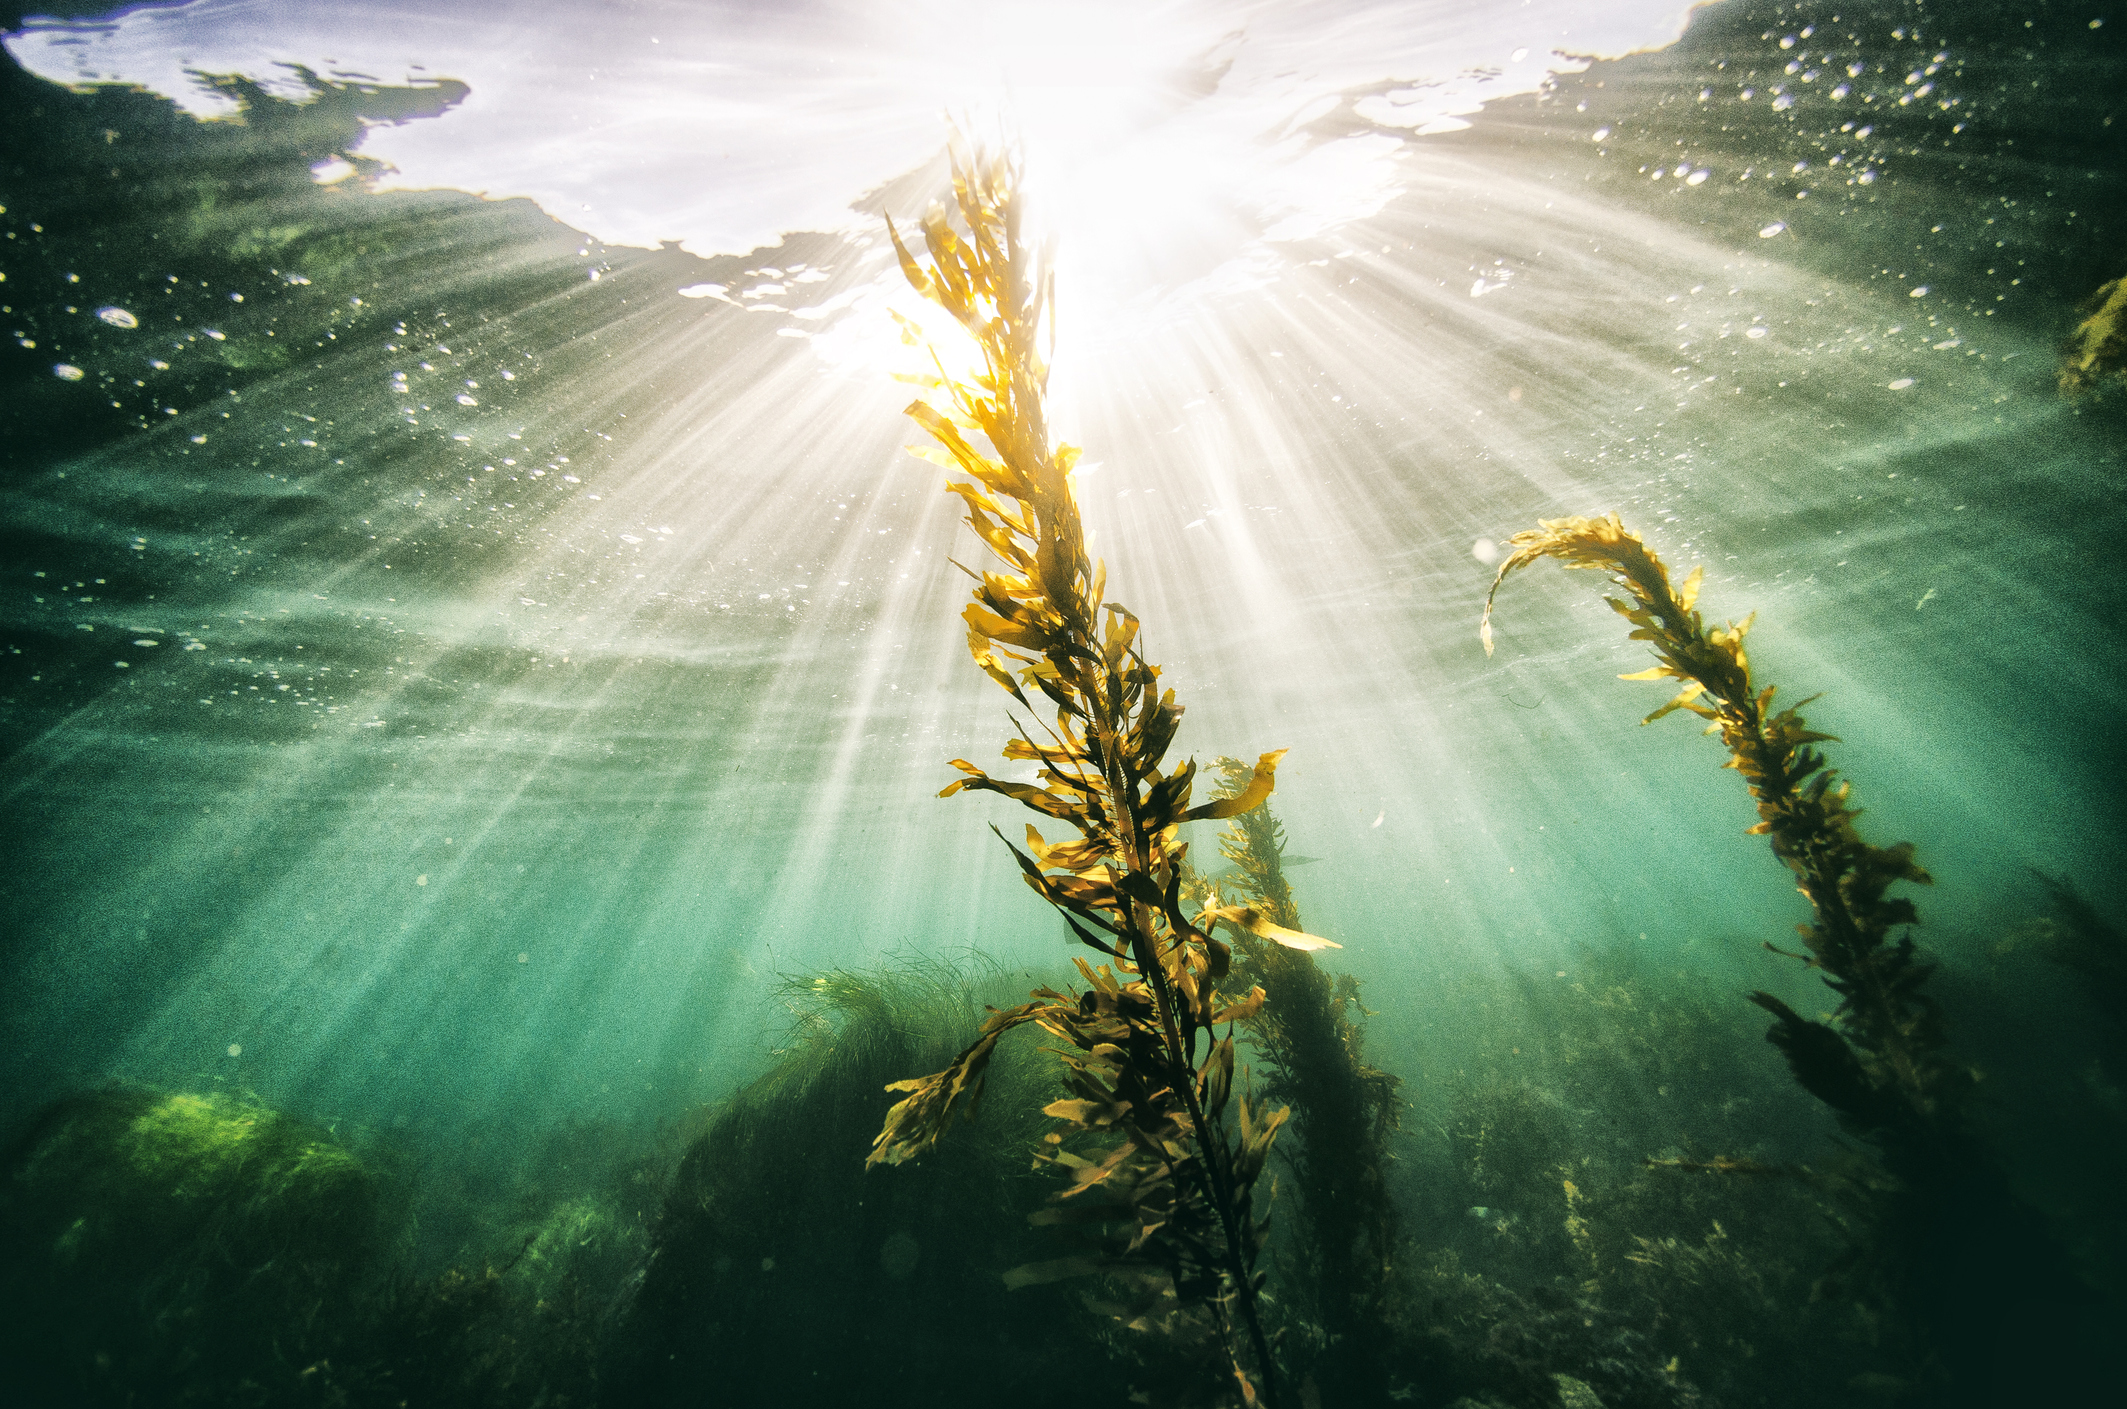 Seaweed growing under the sea with rays of light from shining through the surface.